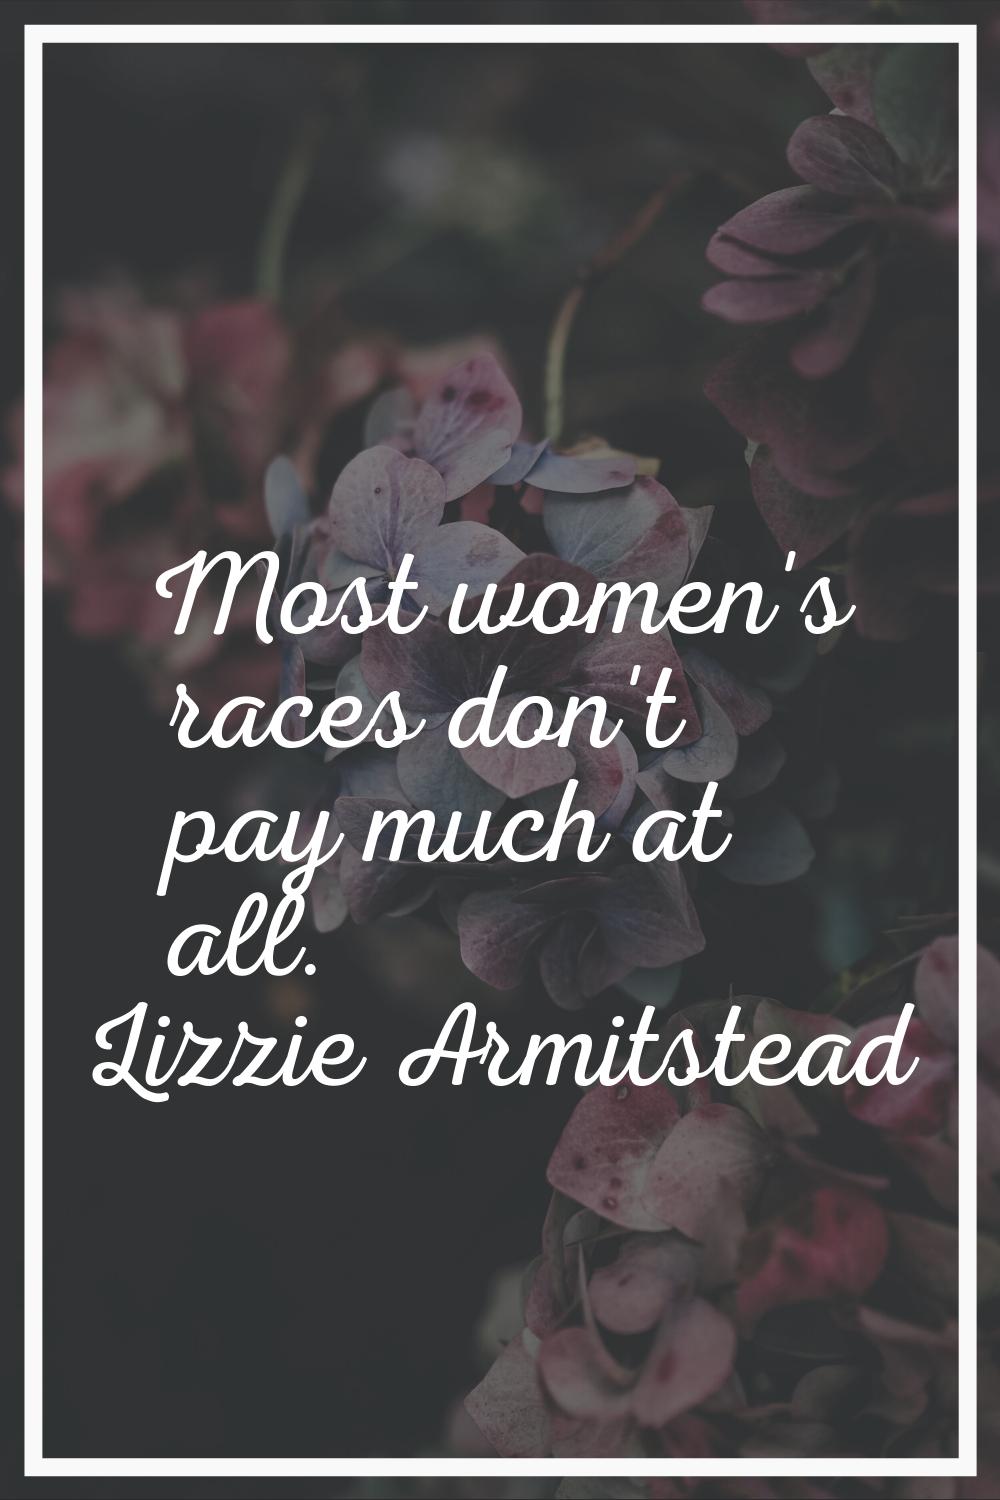 Most women's races don't pay much at all.